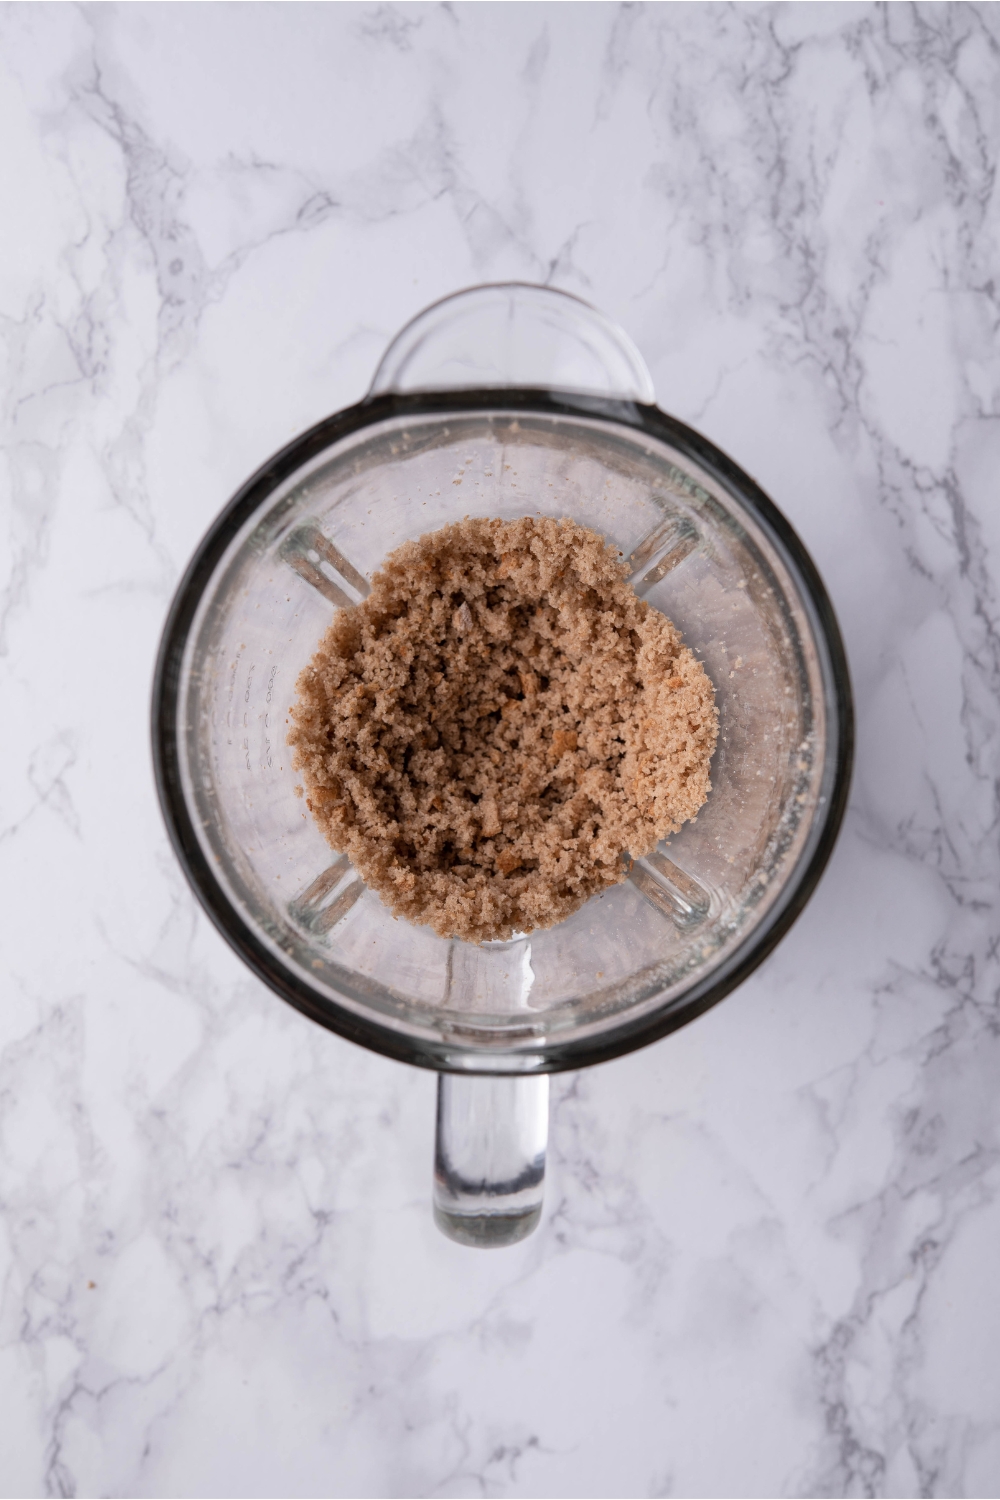 Food processor with bread crumbs.